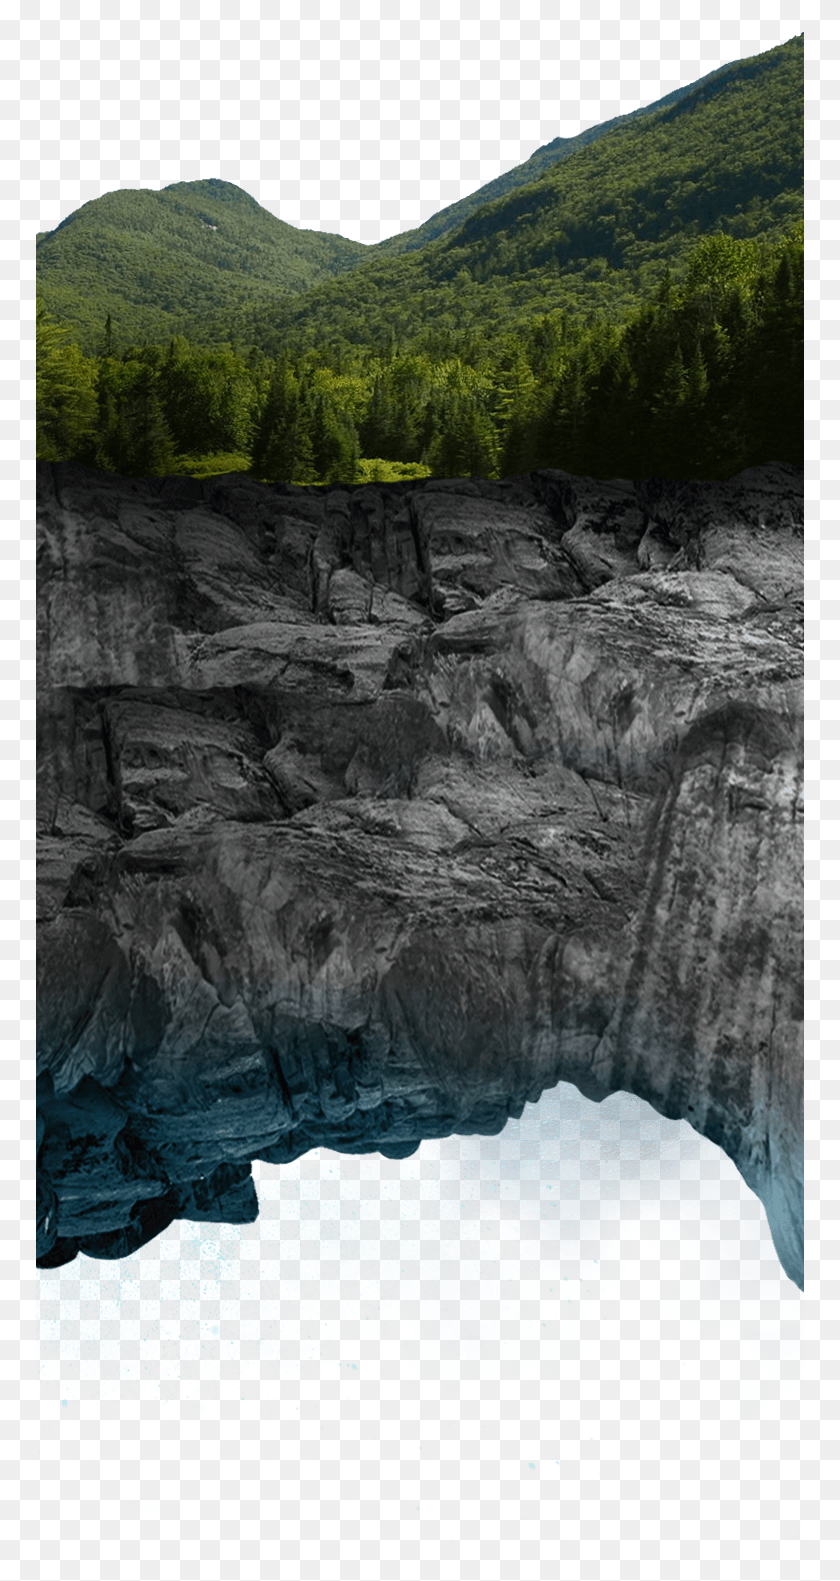 769x1521 Amid The Forests Of The Adirondacks And The Foothills Marcy Dam, Nature, Water, Outdoors Descargar Hd Png